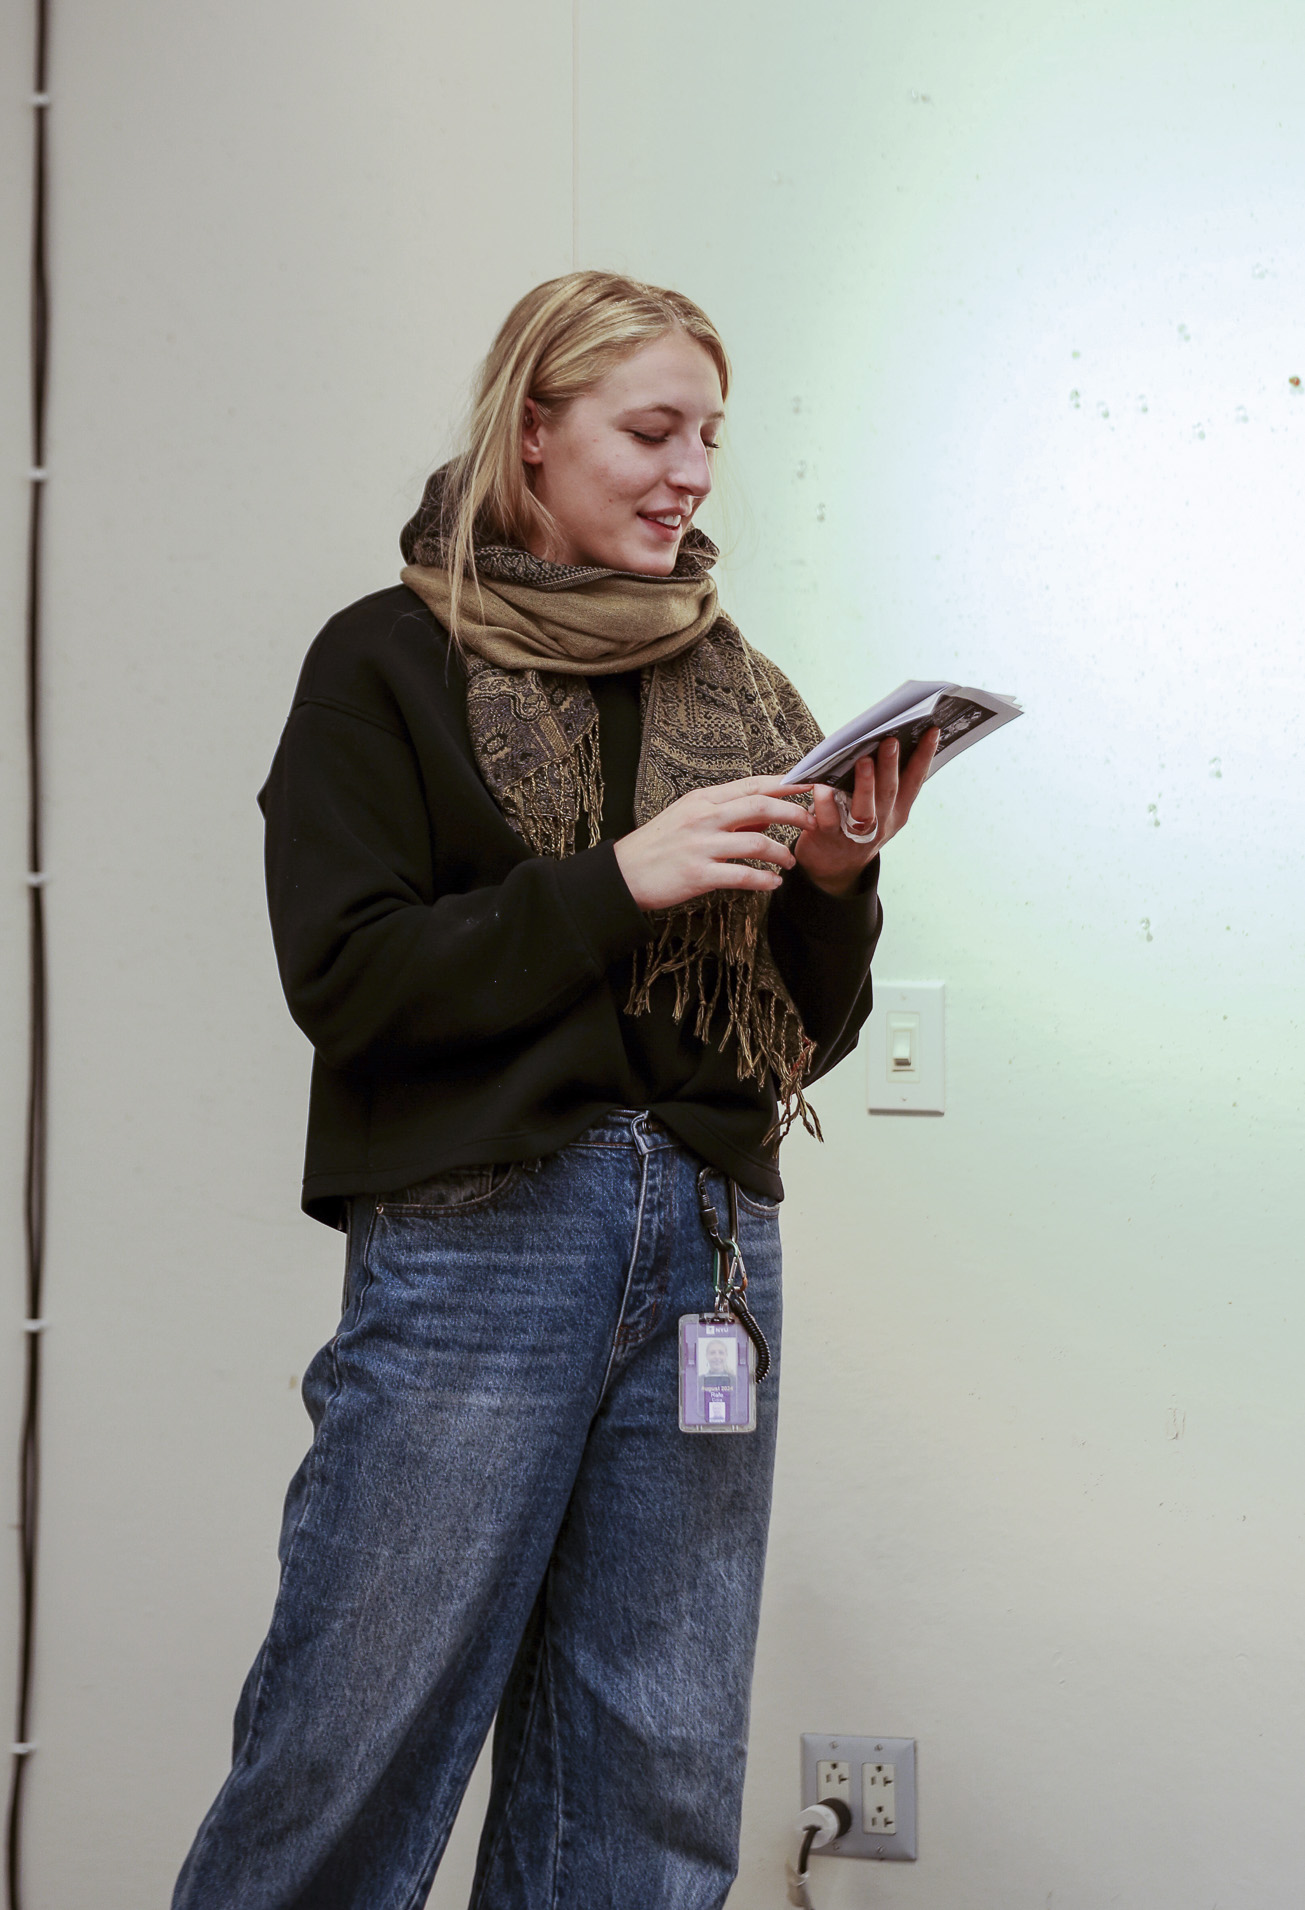 Student Cora Rafe holds an object while standing